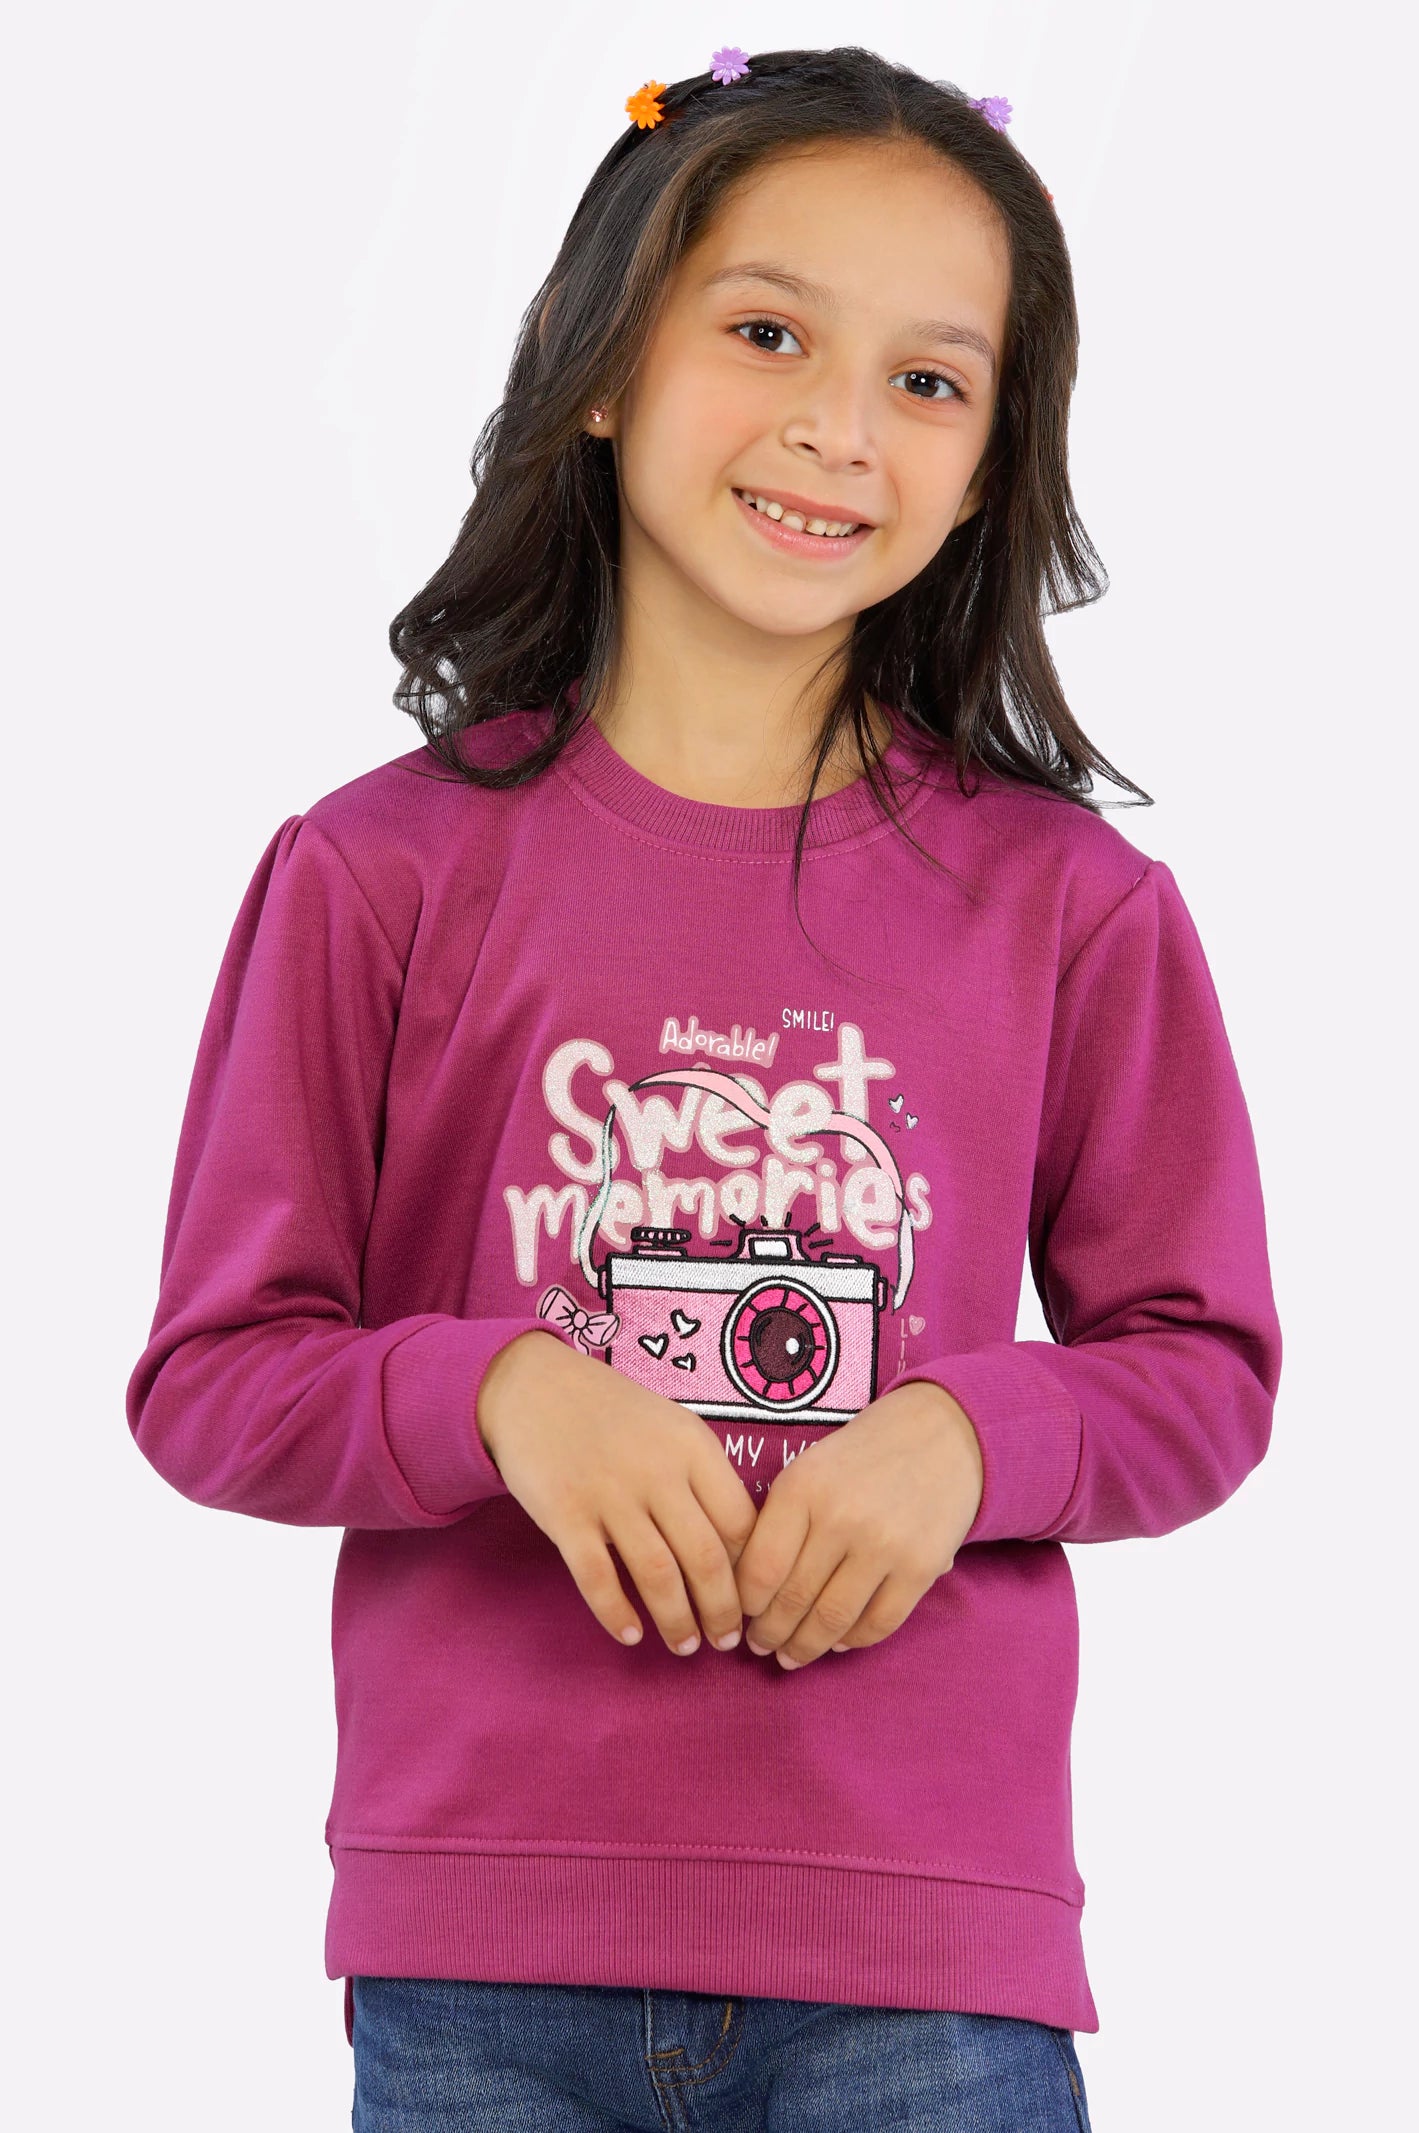 Graphic Printed Girls Sweatshirt From Diners